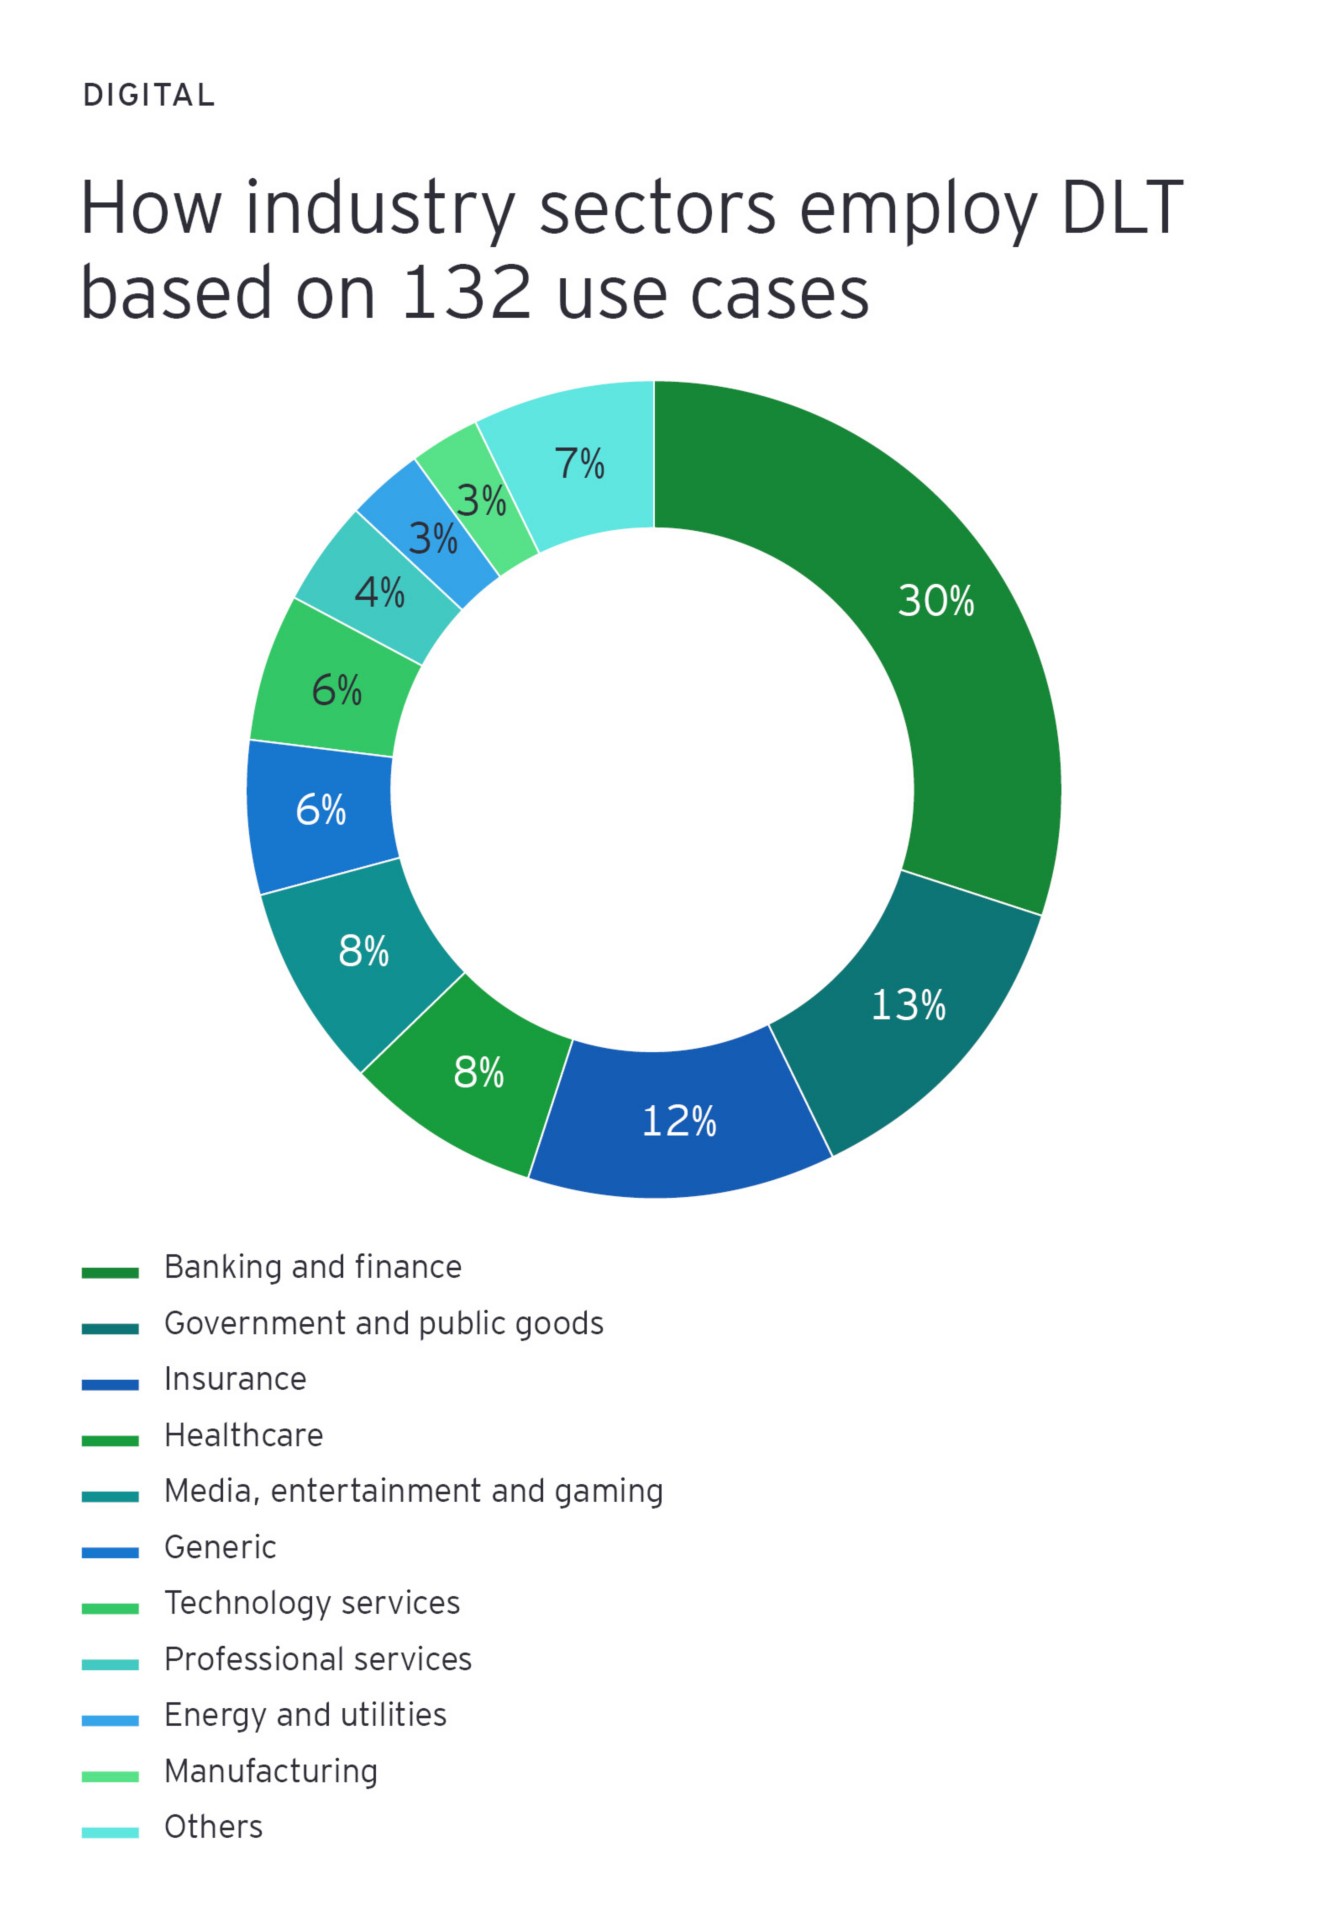 How industry sectors employ DLT based on 132 uses cases